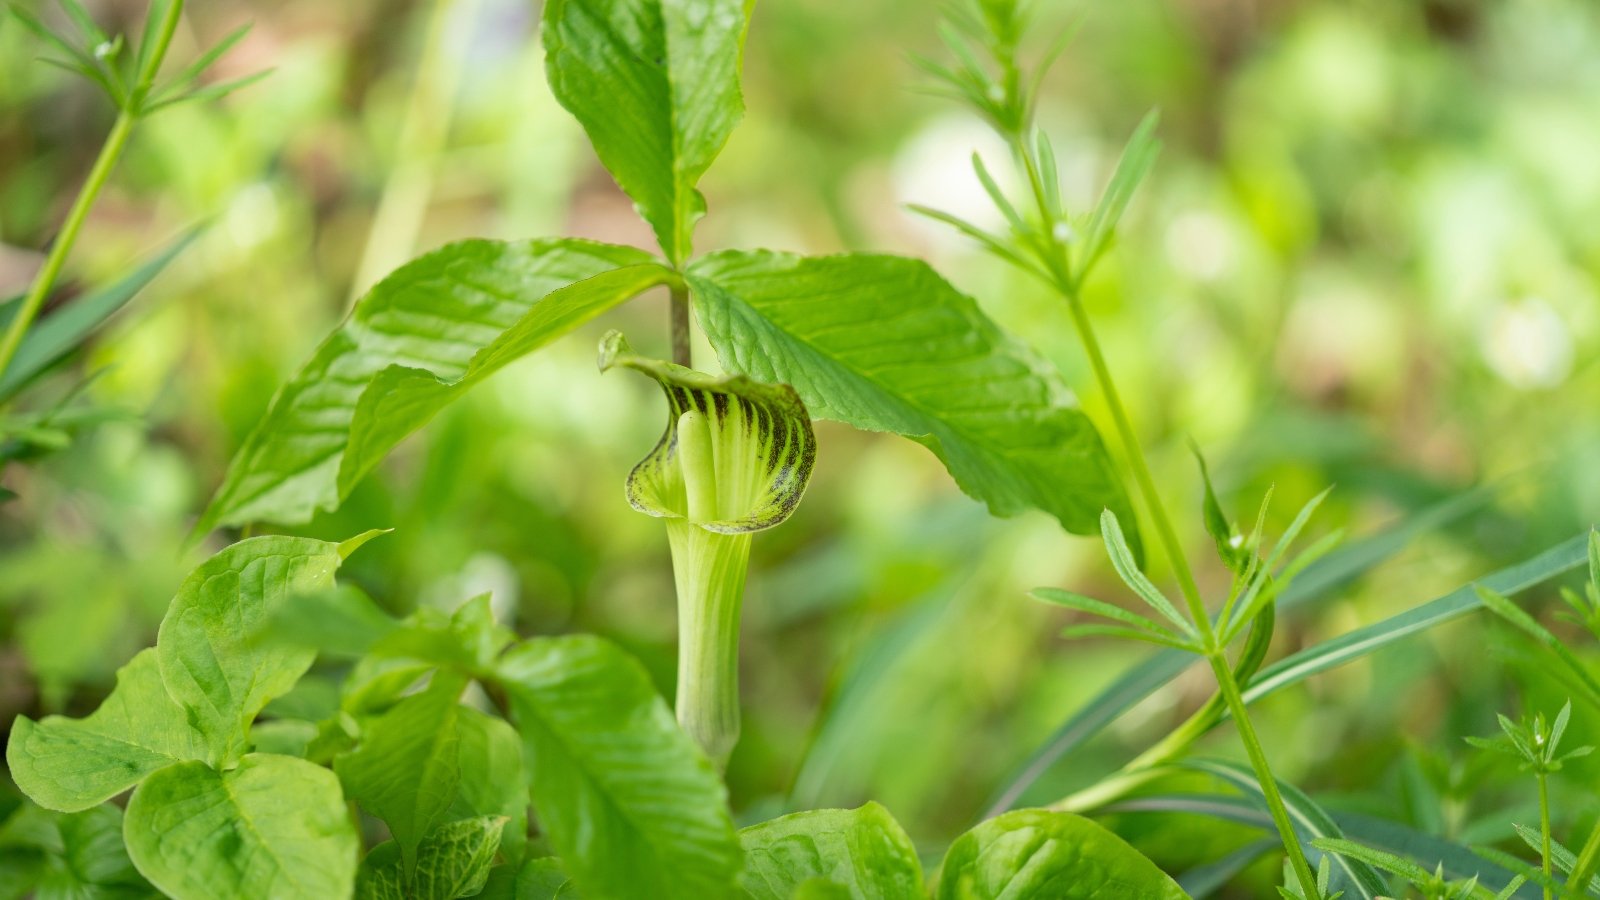 The Arisaema triphyllum boasts a unique flower with a striped, hooded spathe enveloping a slender spadix, accompanied by large, trifoliate leaves that are glossy and bright green.